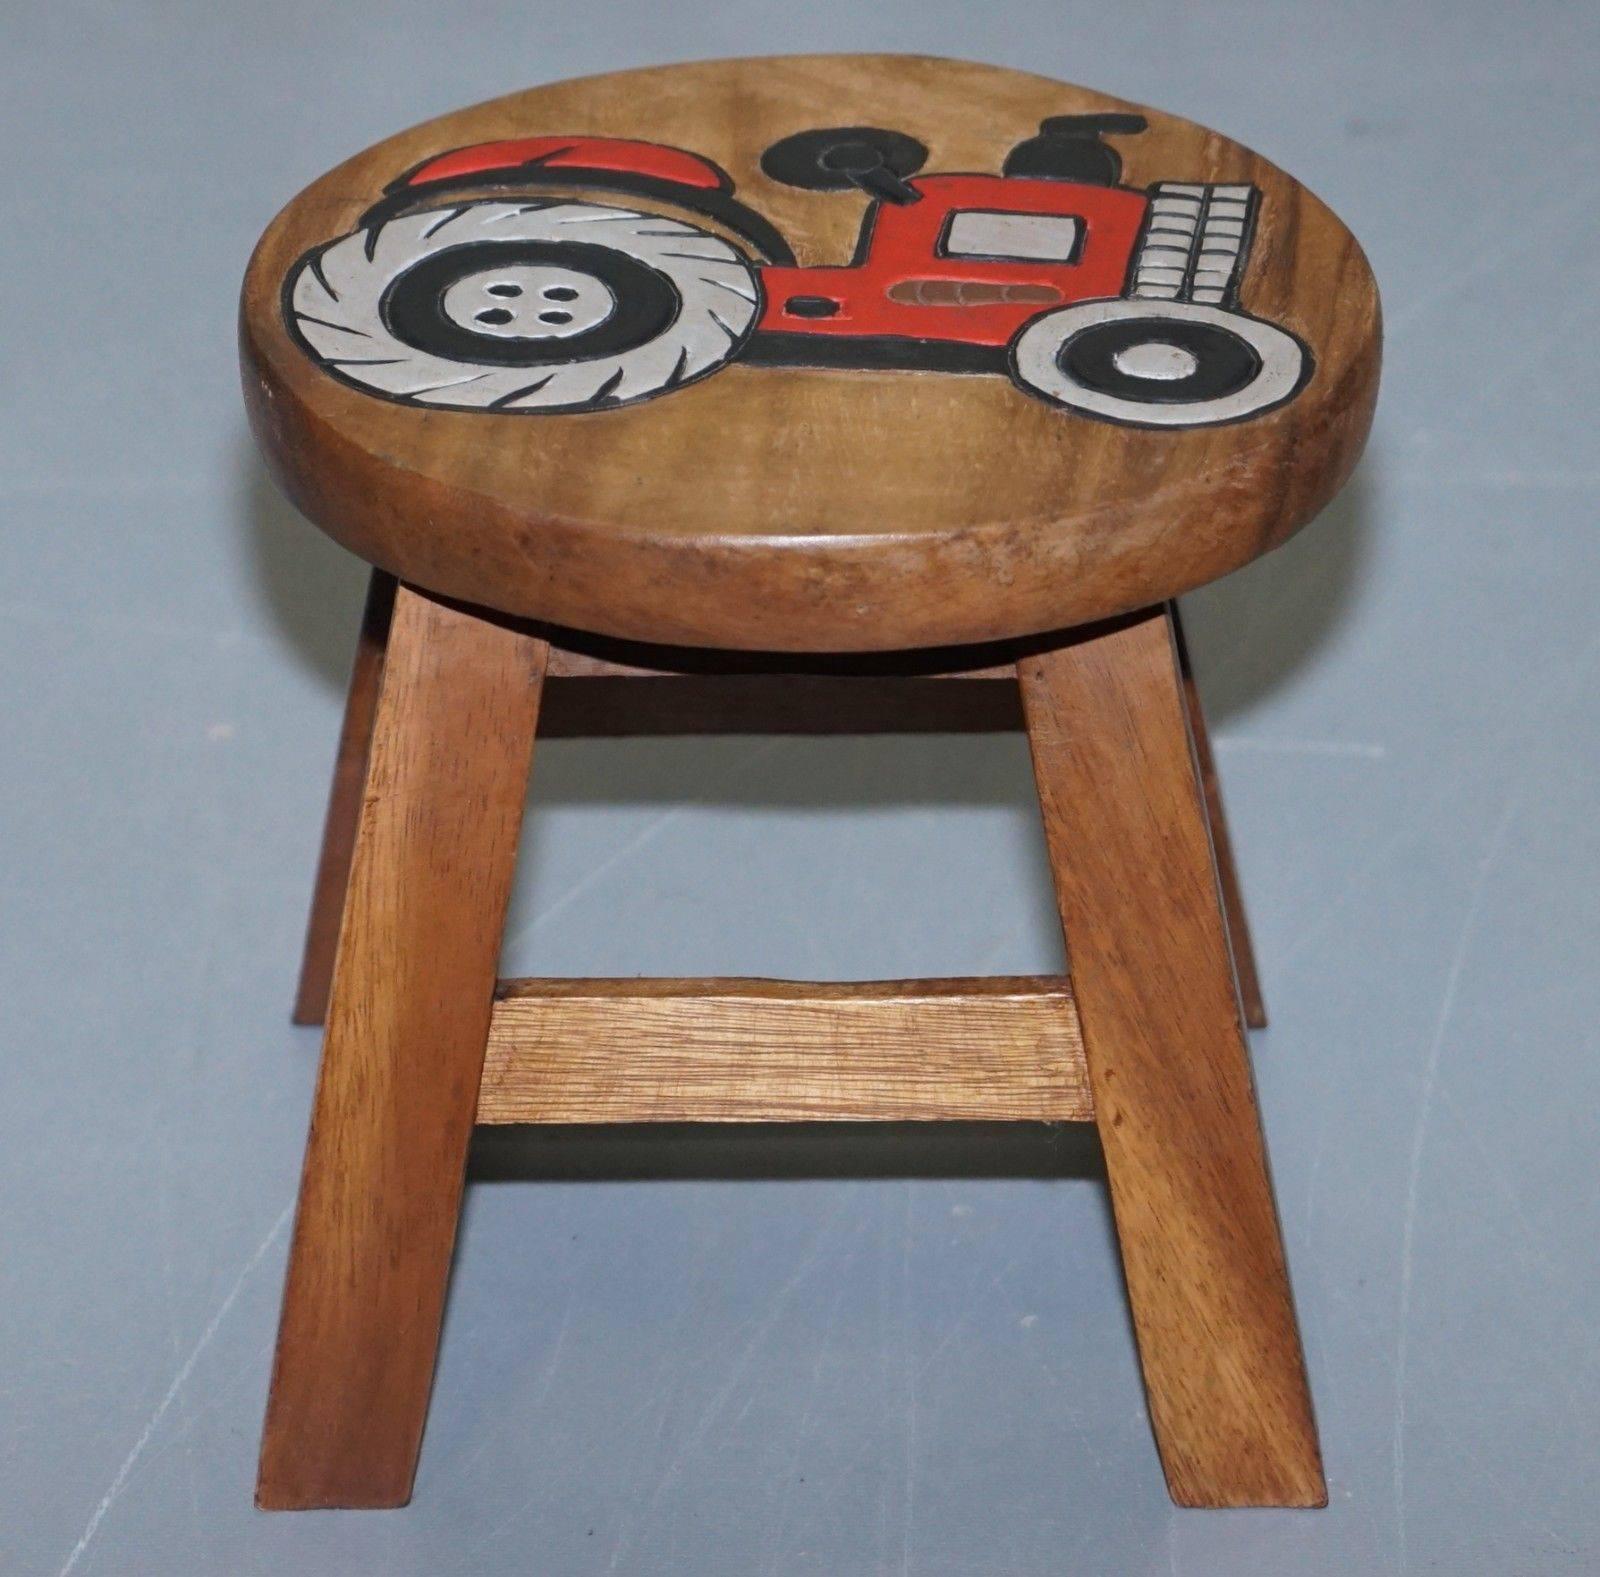 Modern Lovely Pair of Toddlers Children's Solid Wood Stools with Little Tractors on